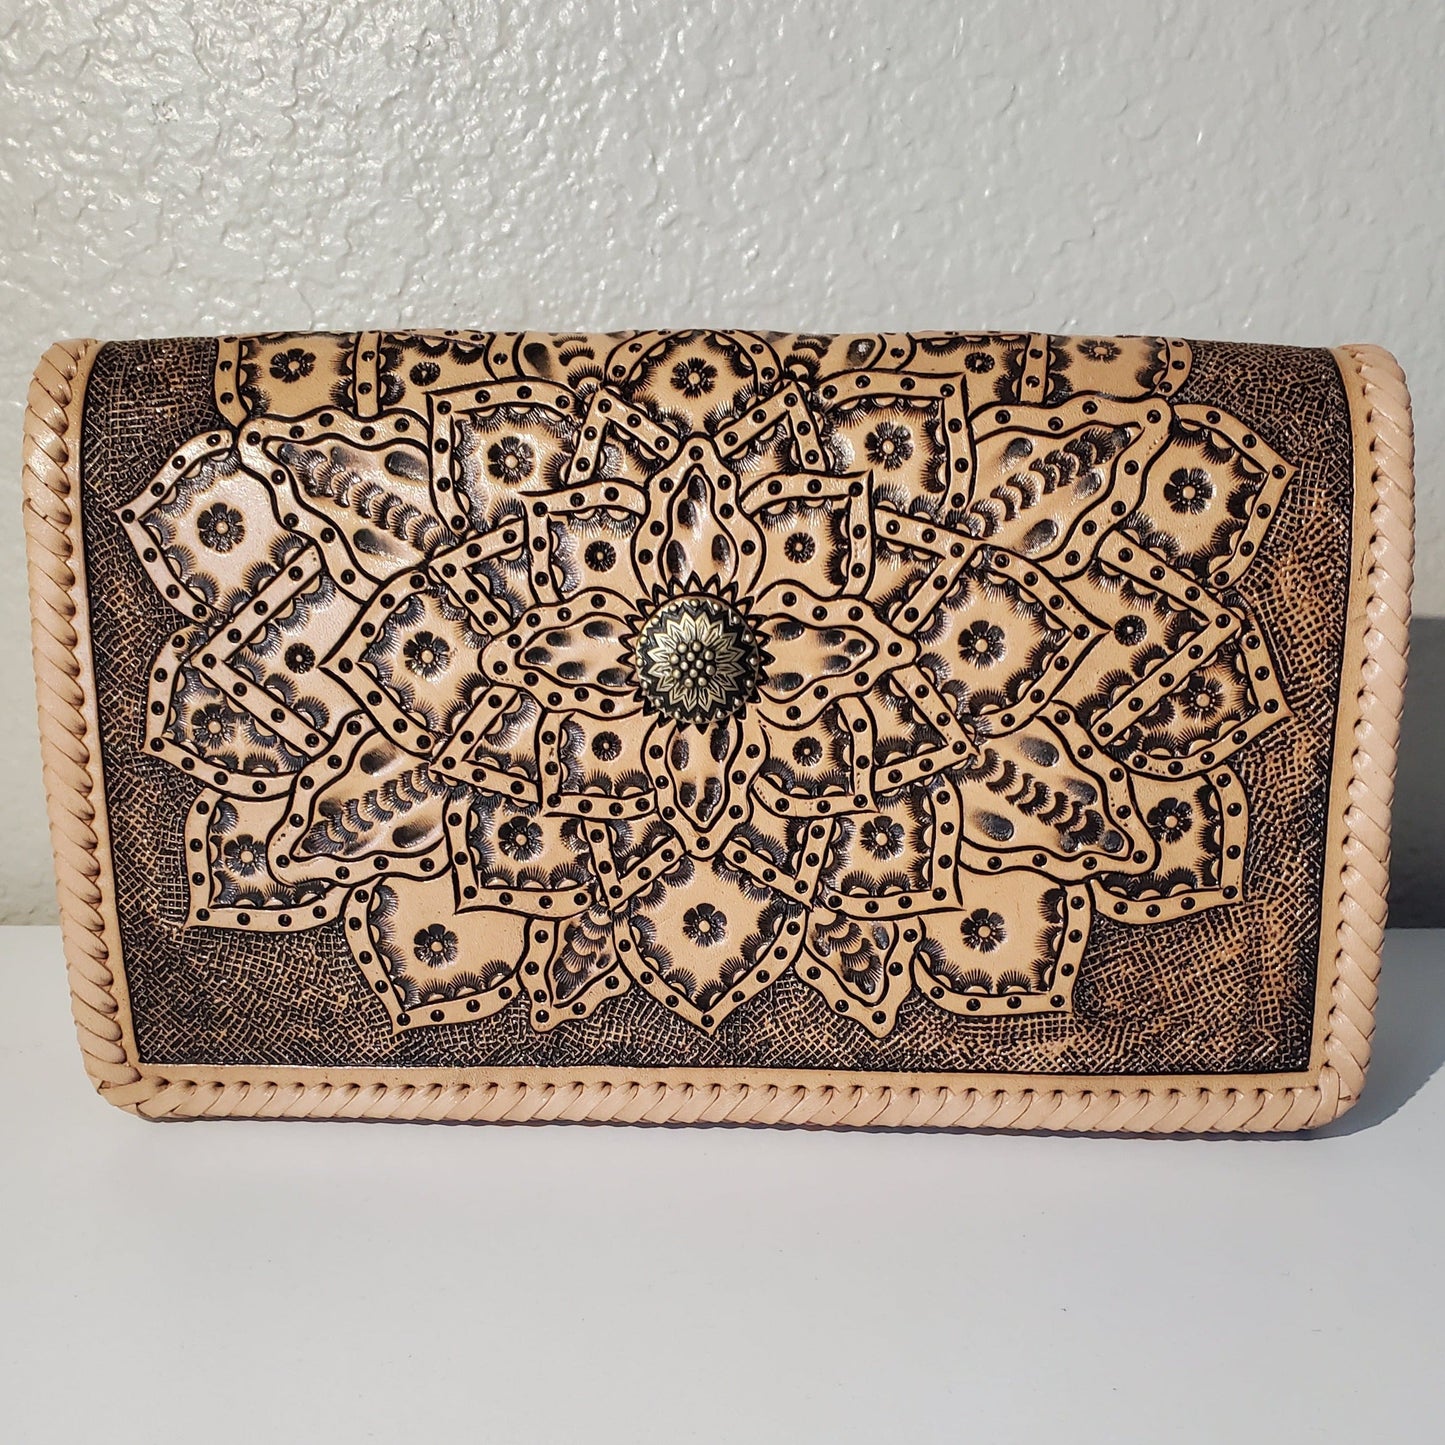 Hand Made Leather Crossbody Bag "CECELIA" by MIOHERMOSA Natural Cecilia Mayan Flower